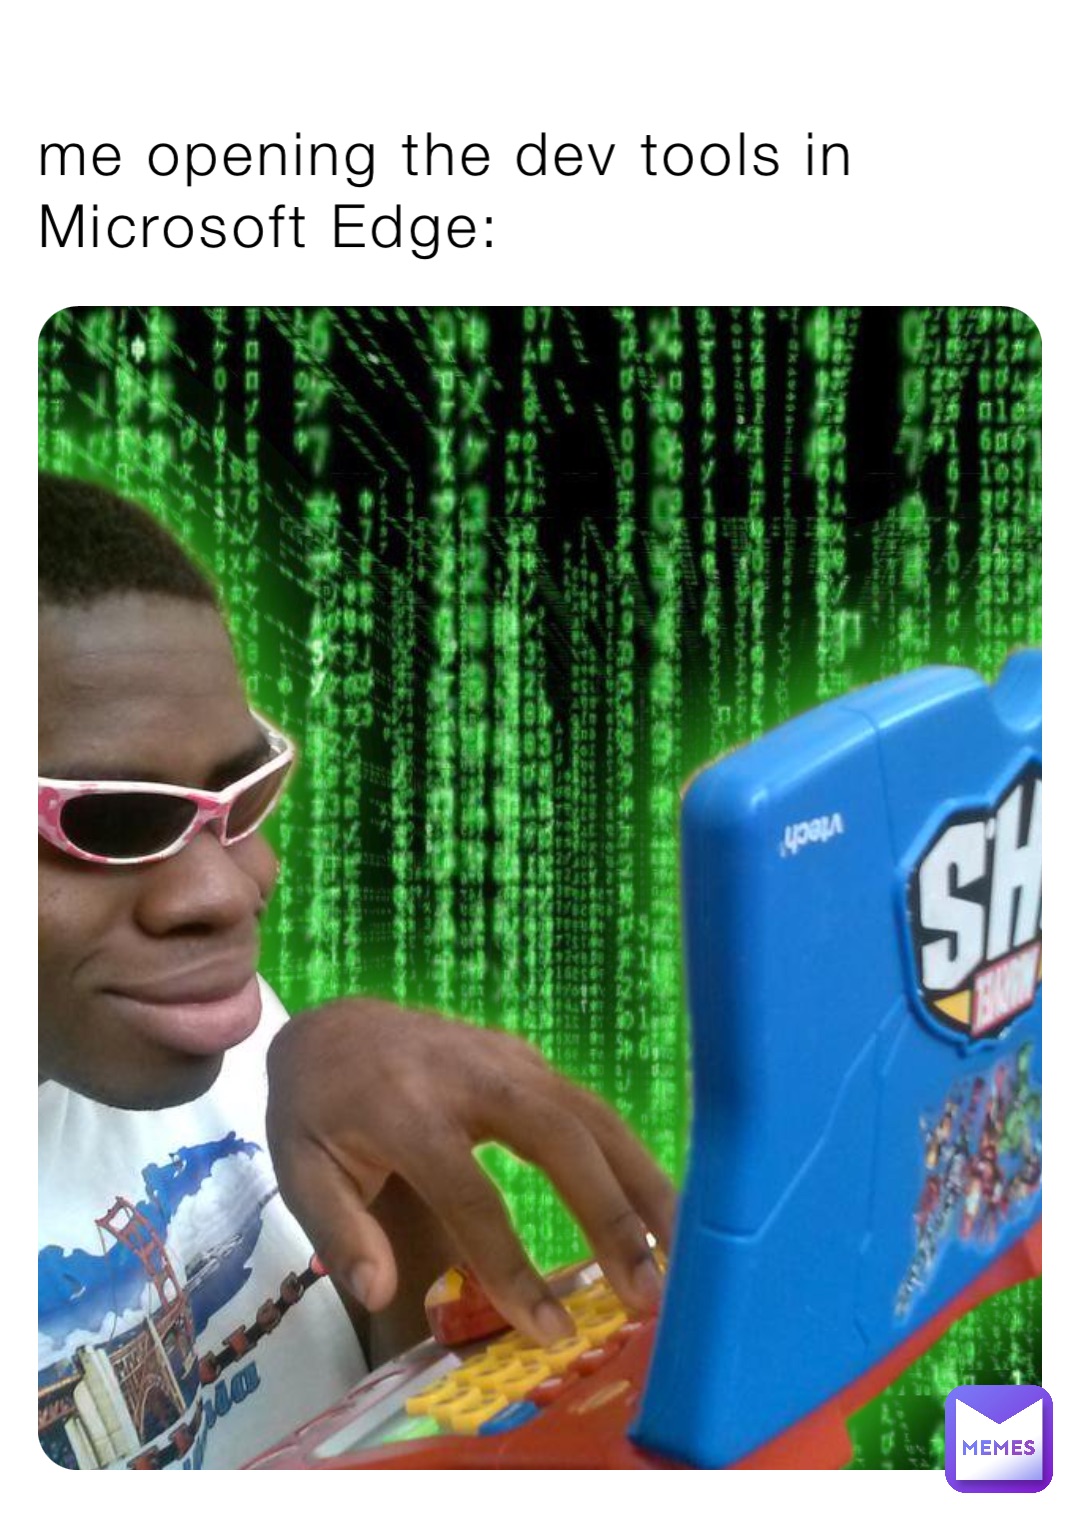 me opening the dev tools in Microsoft Edge: